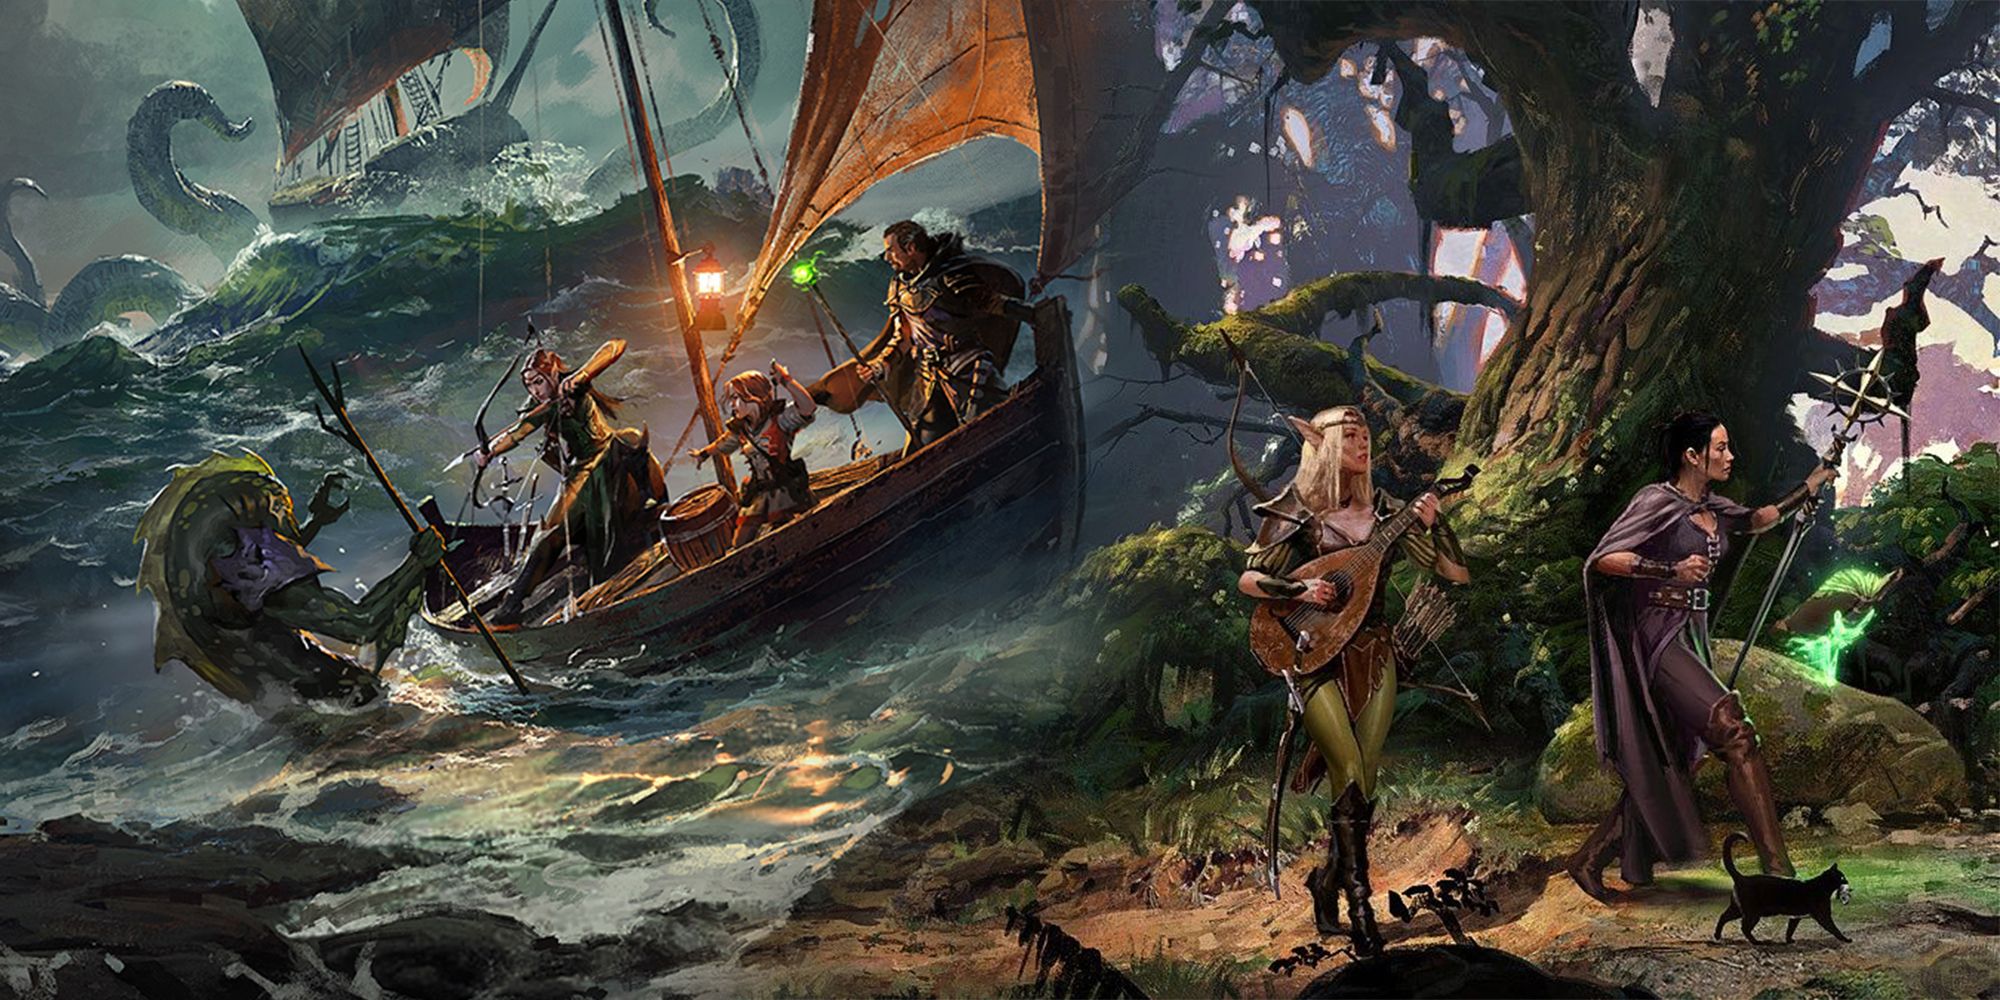 Split image of a party of adventurers traversing the woods, and a party on a boat